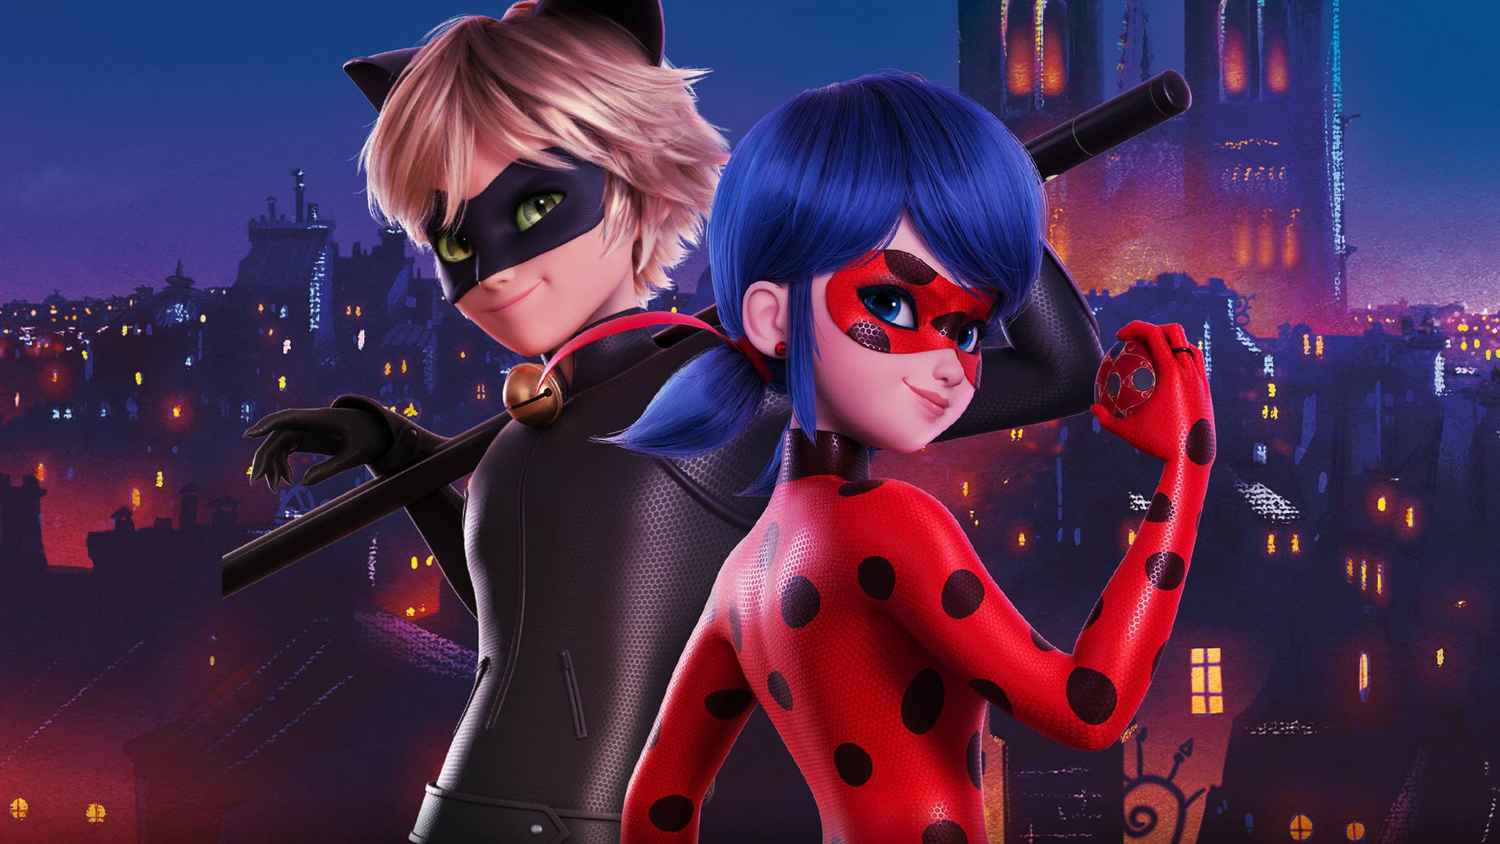 miraculous ladybug film release date - Lorilee Dunning